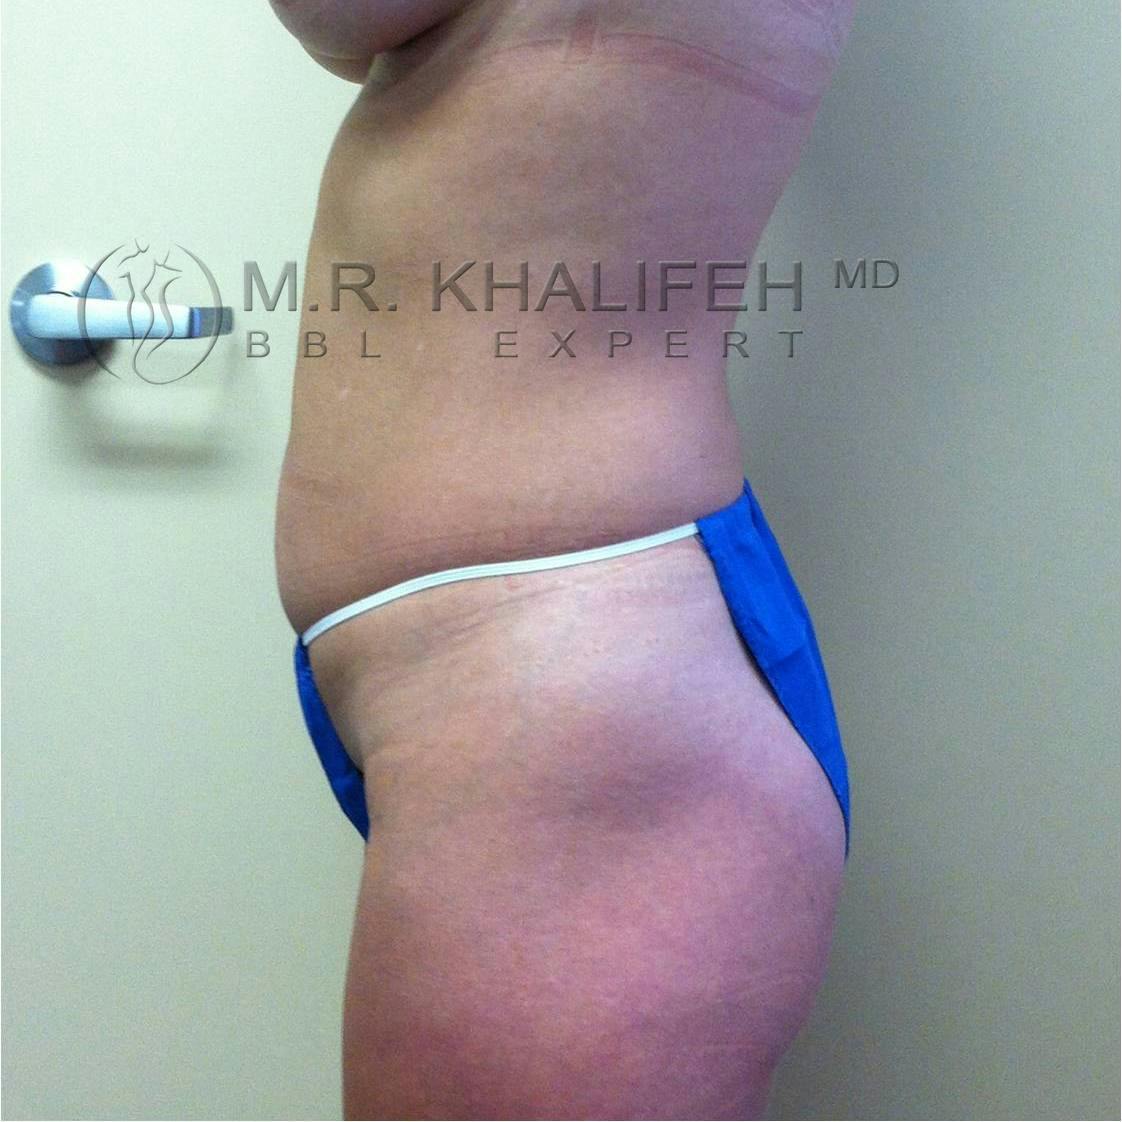 Flank-Lower Back Liposuction Gallery - Patient 3719773 - Image 5